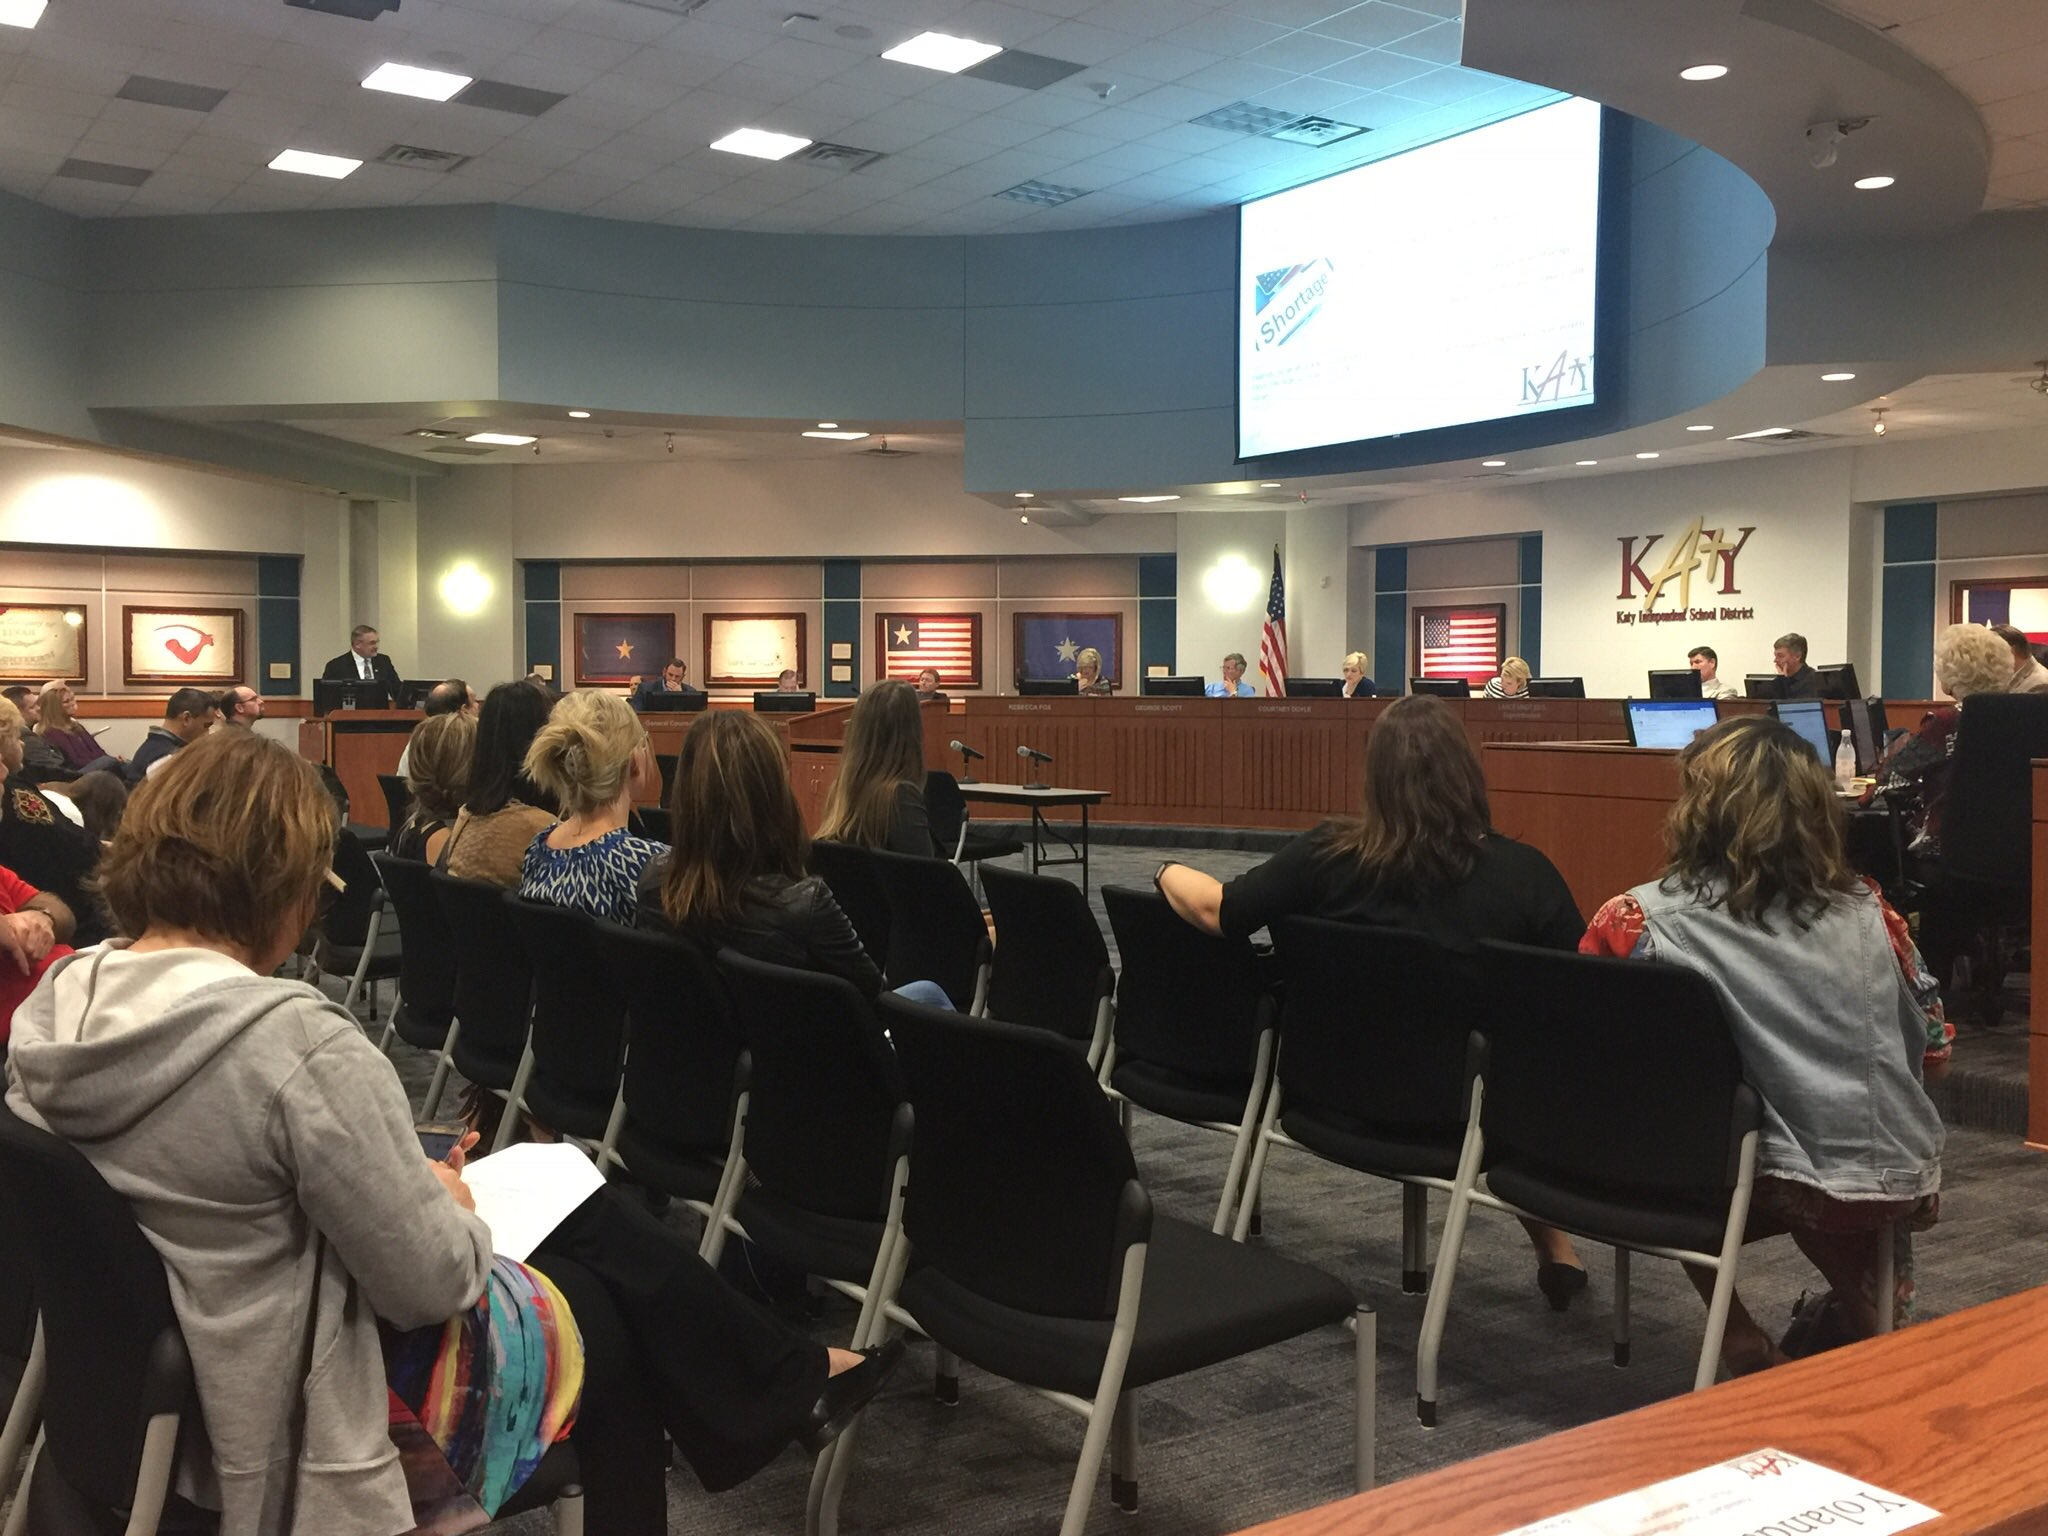 Katy ISD Welcomes Stakeholder Input at Public Hearing